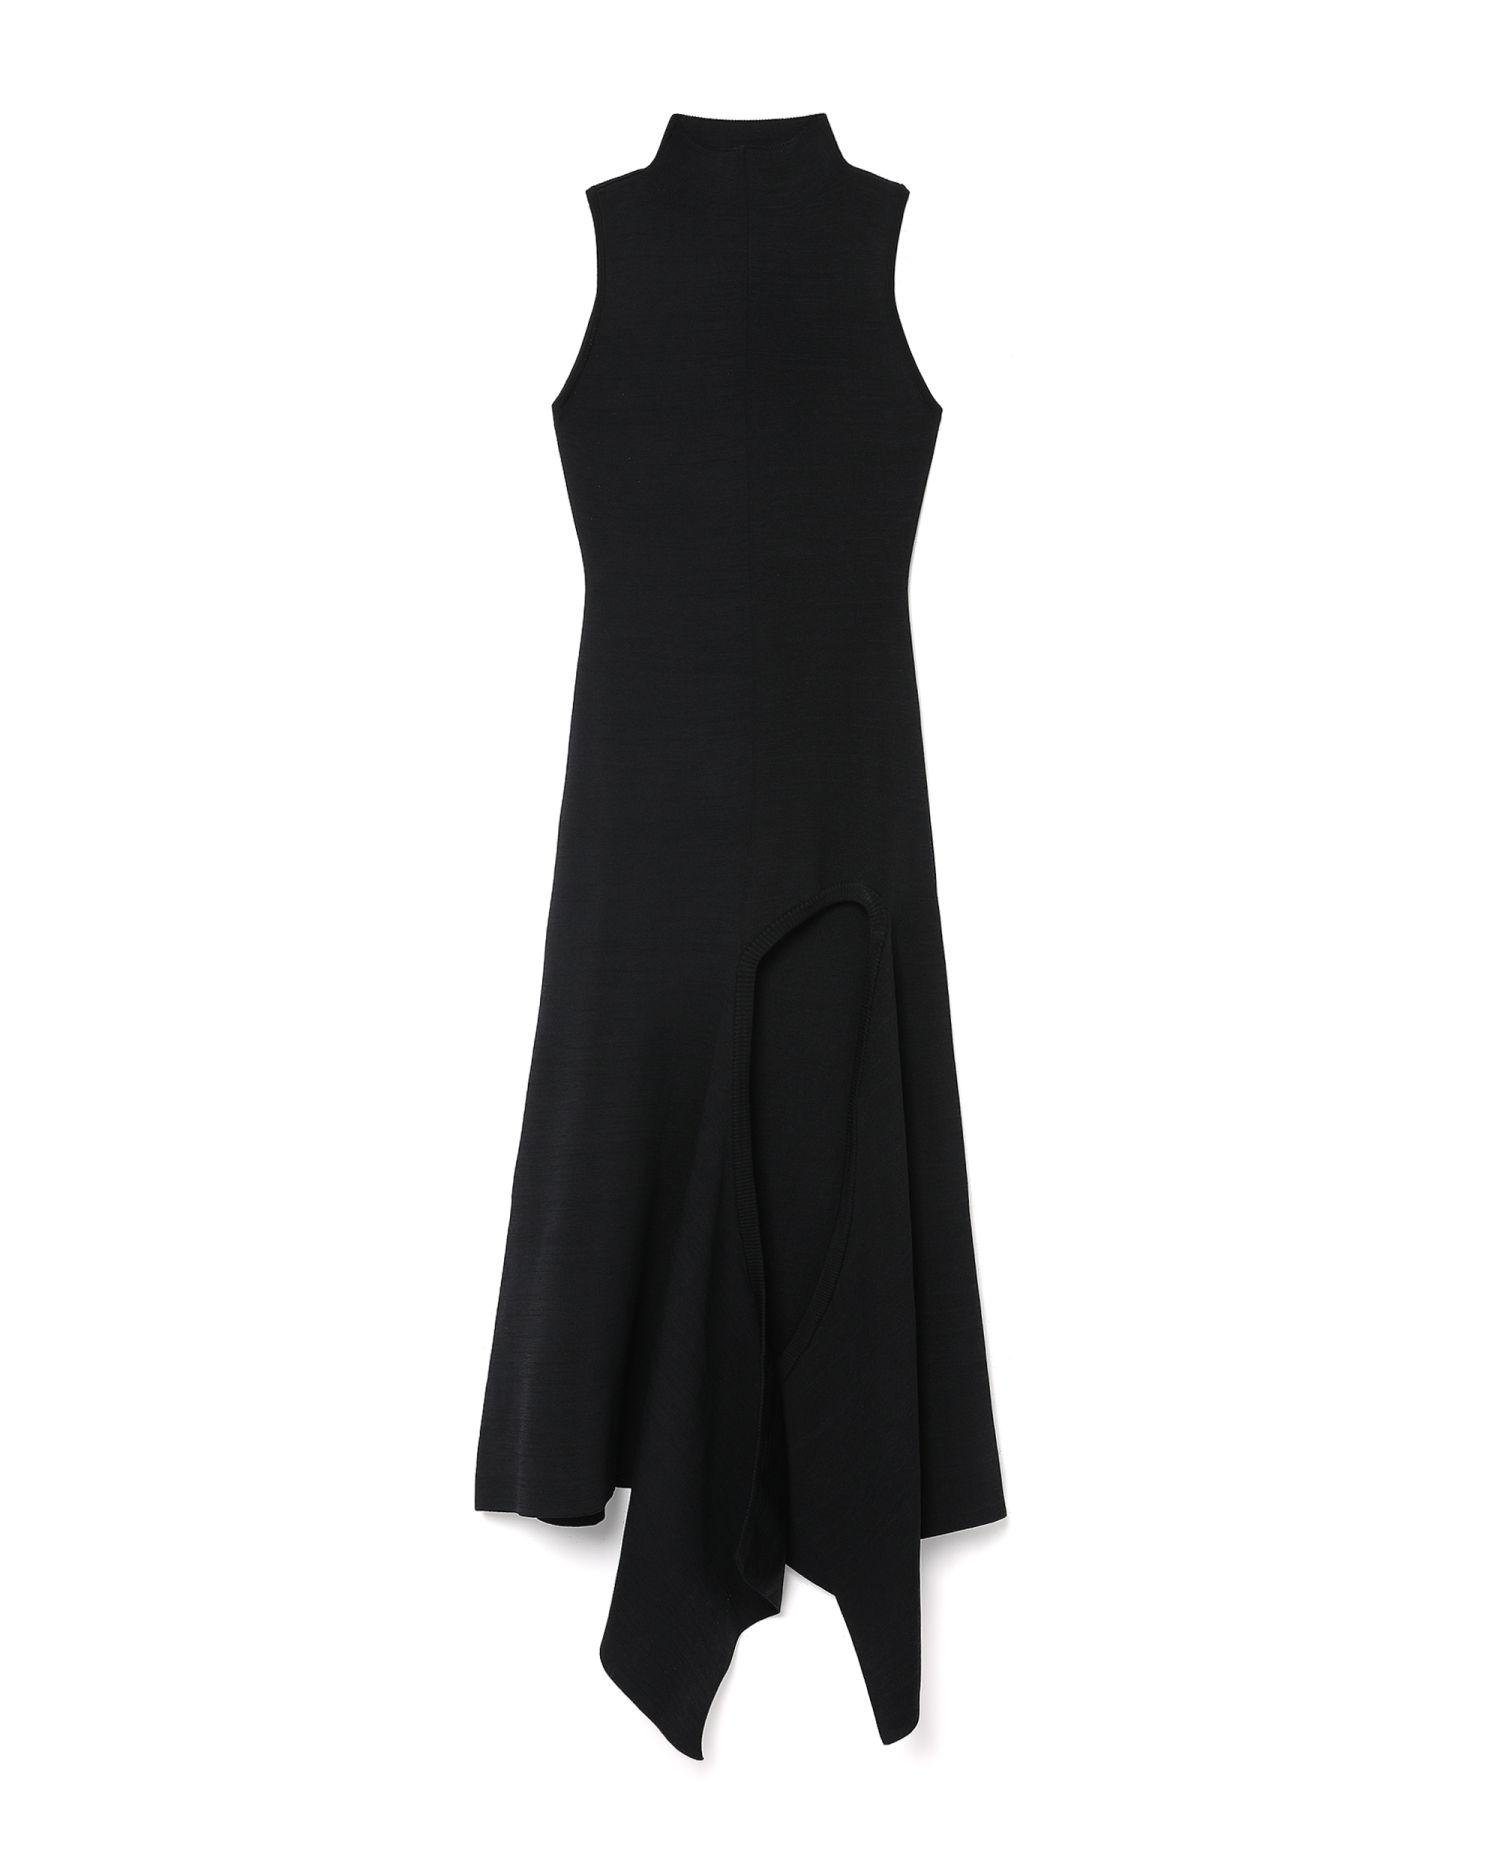 High slit sleeveless dress by Y/PROJECT